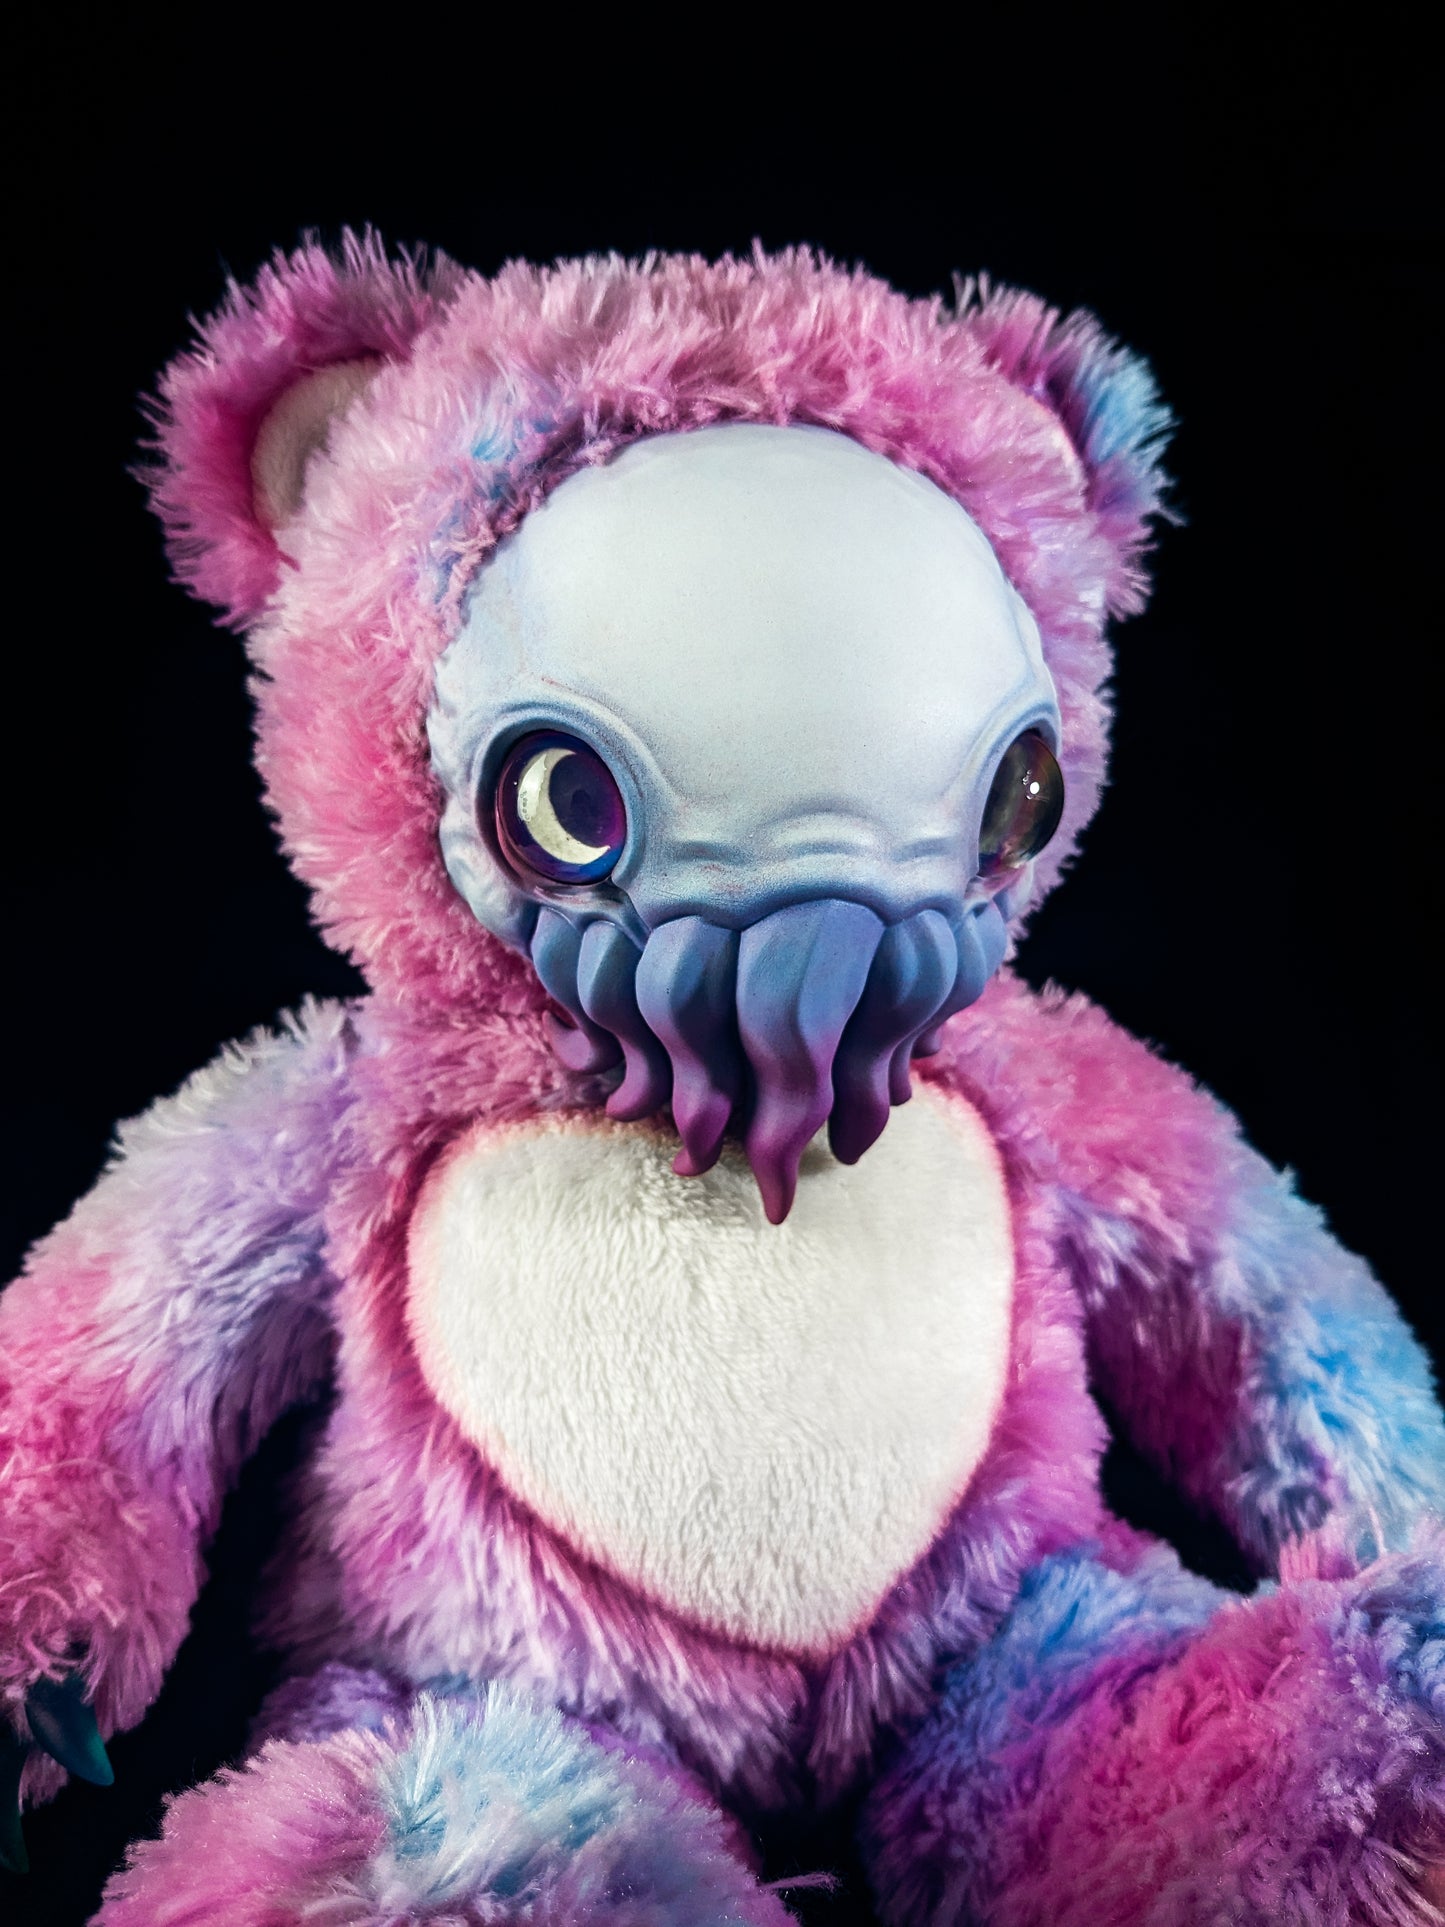 Cthulhu Floss: ELDINUTH - CRYPTCRITS Handcrafted Lovecraftian Cthulhu Art Doll Plush Toy for Eldritch Entities